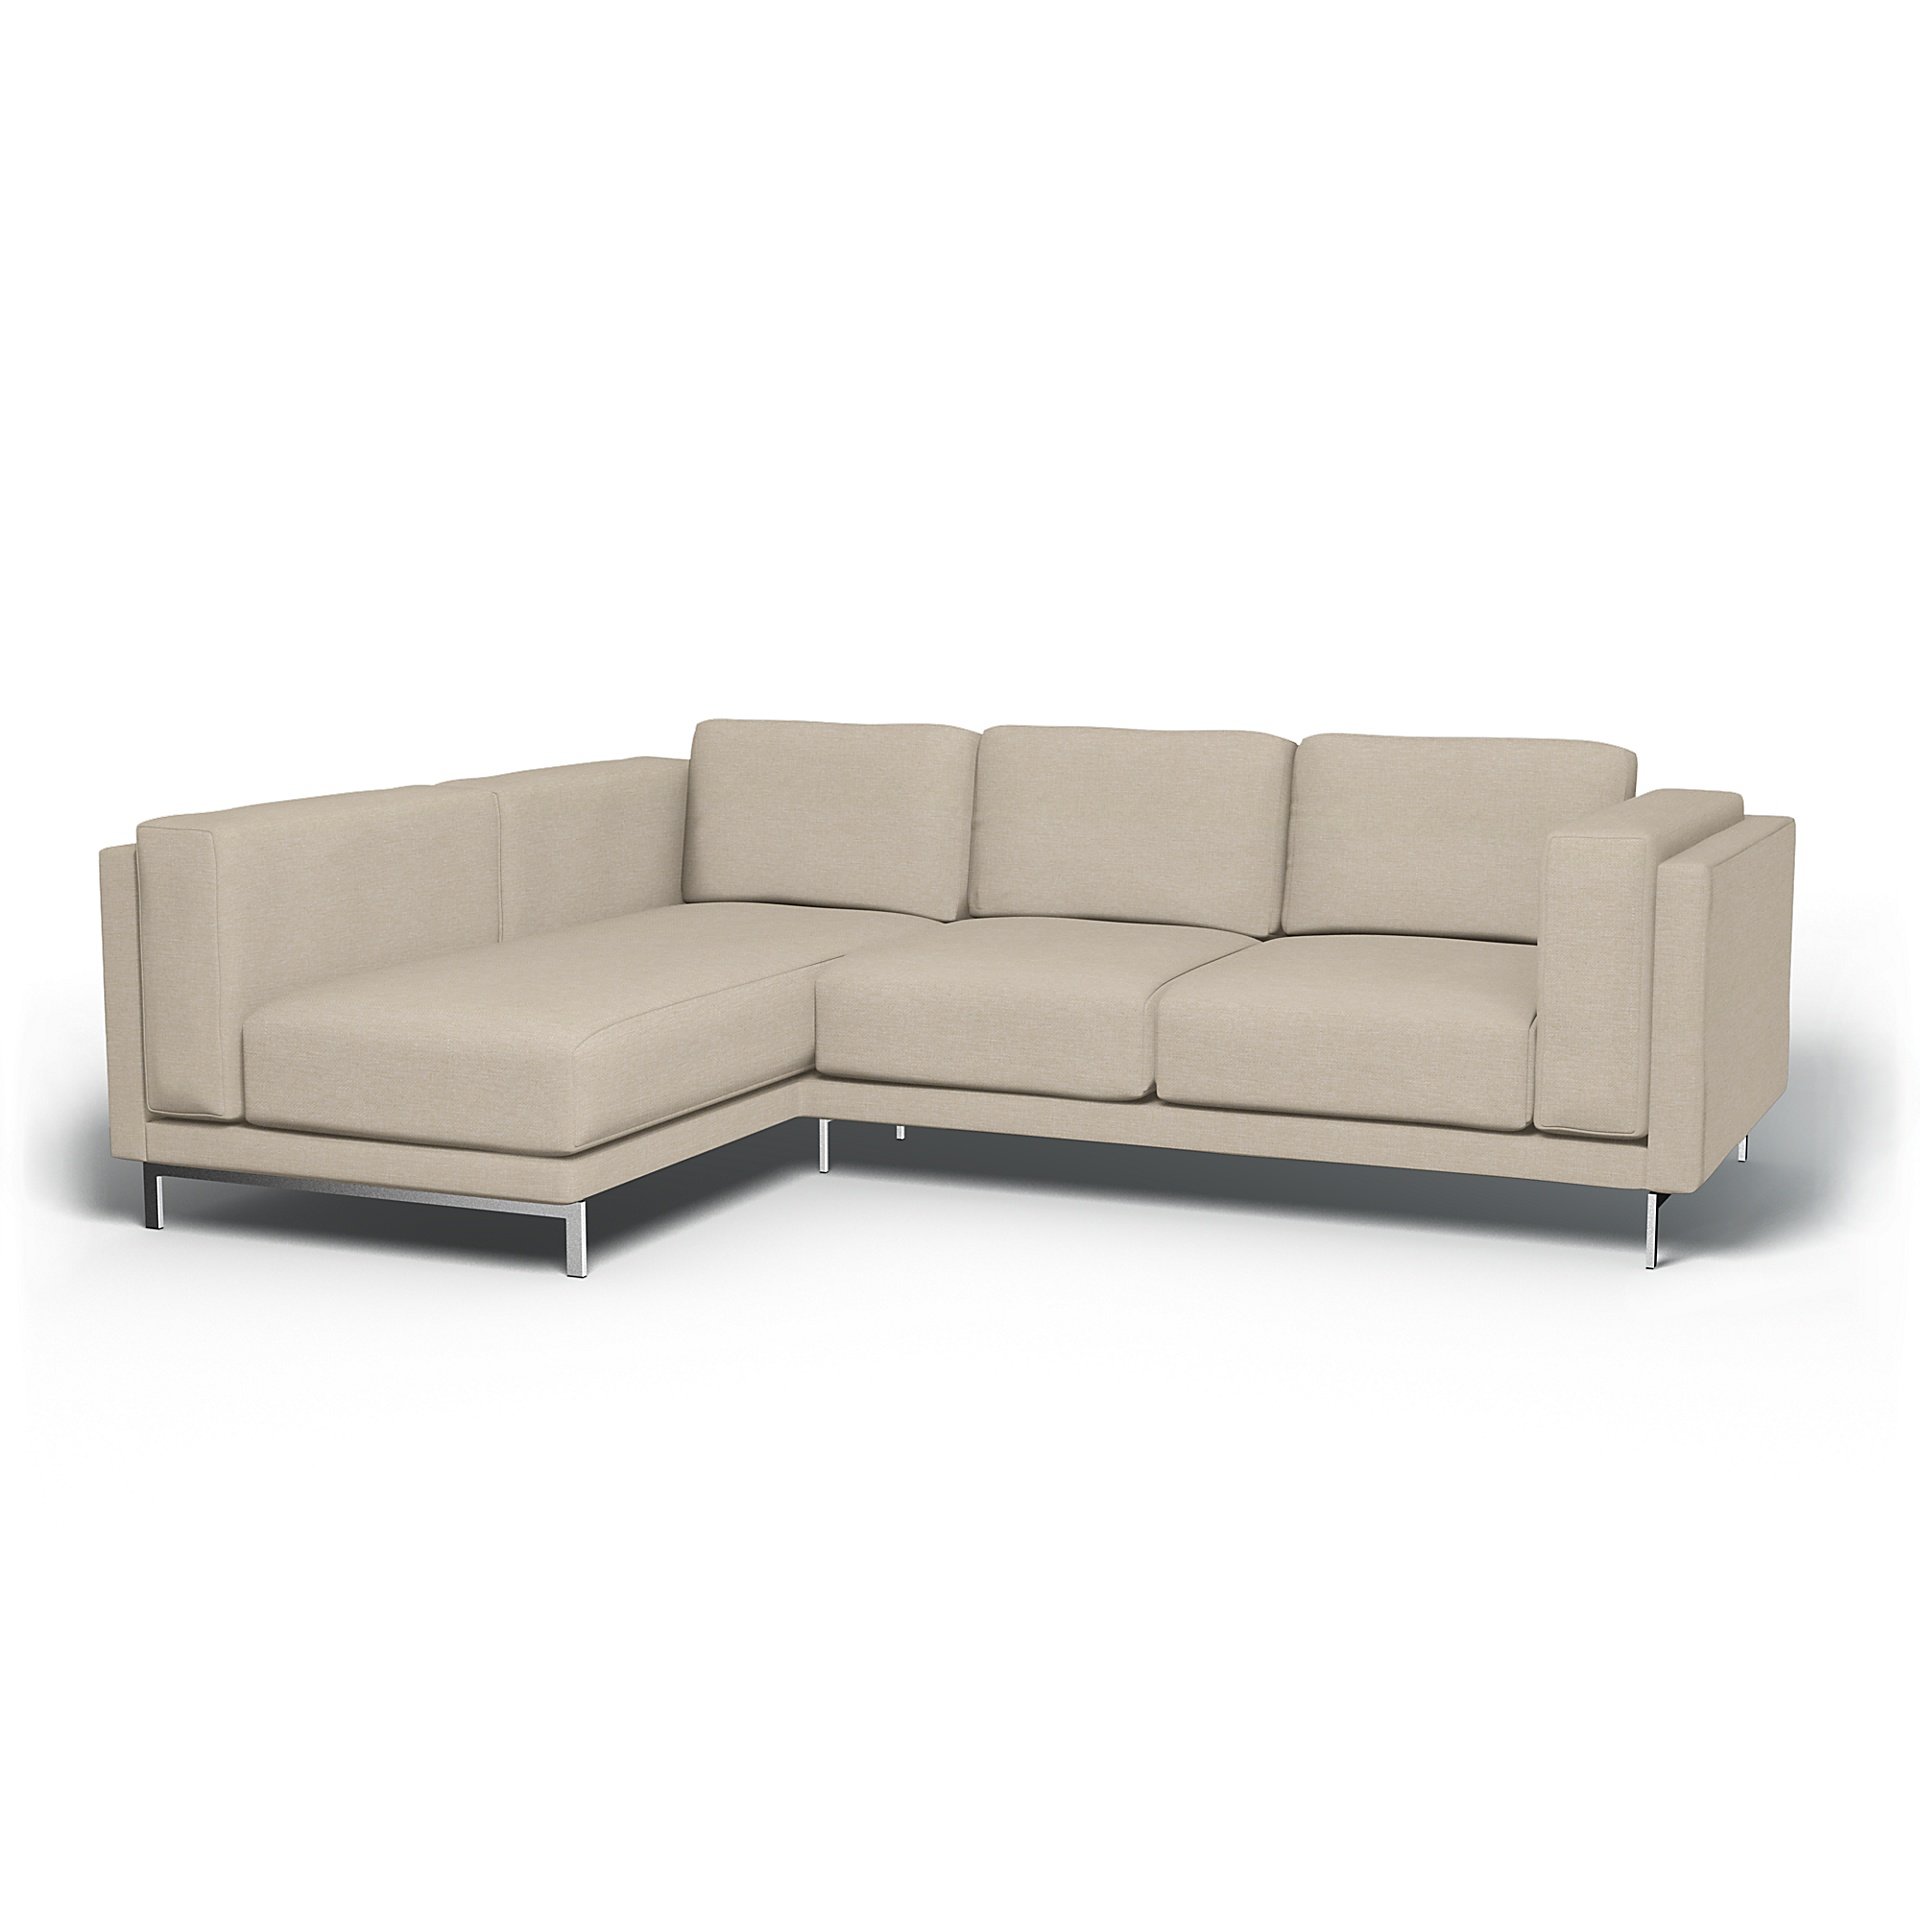 IKEA - Nockeby 3 Seater Sofa with Left Chaise Cover, Natural, Boucle & Texture - Bemz